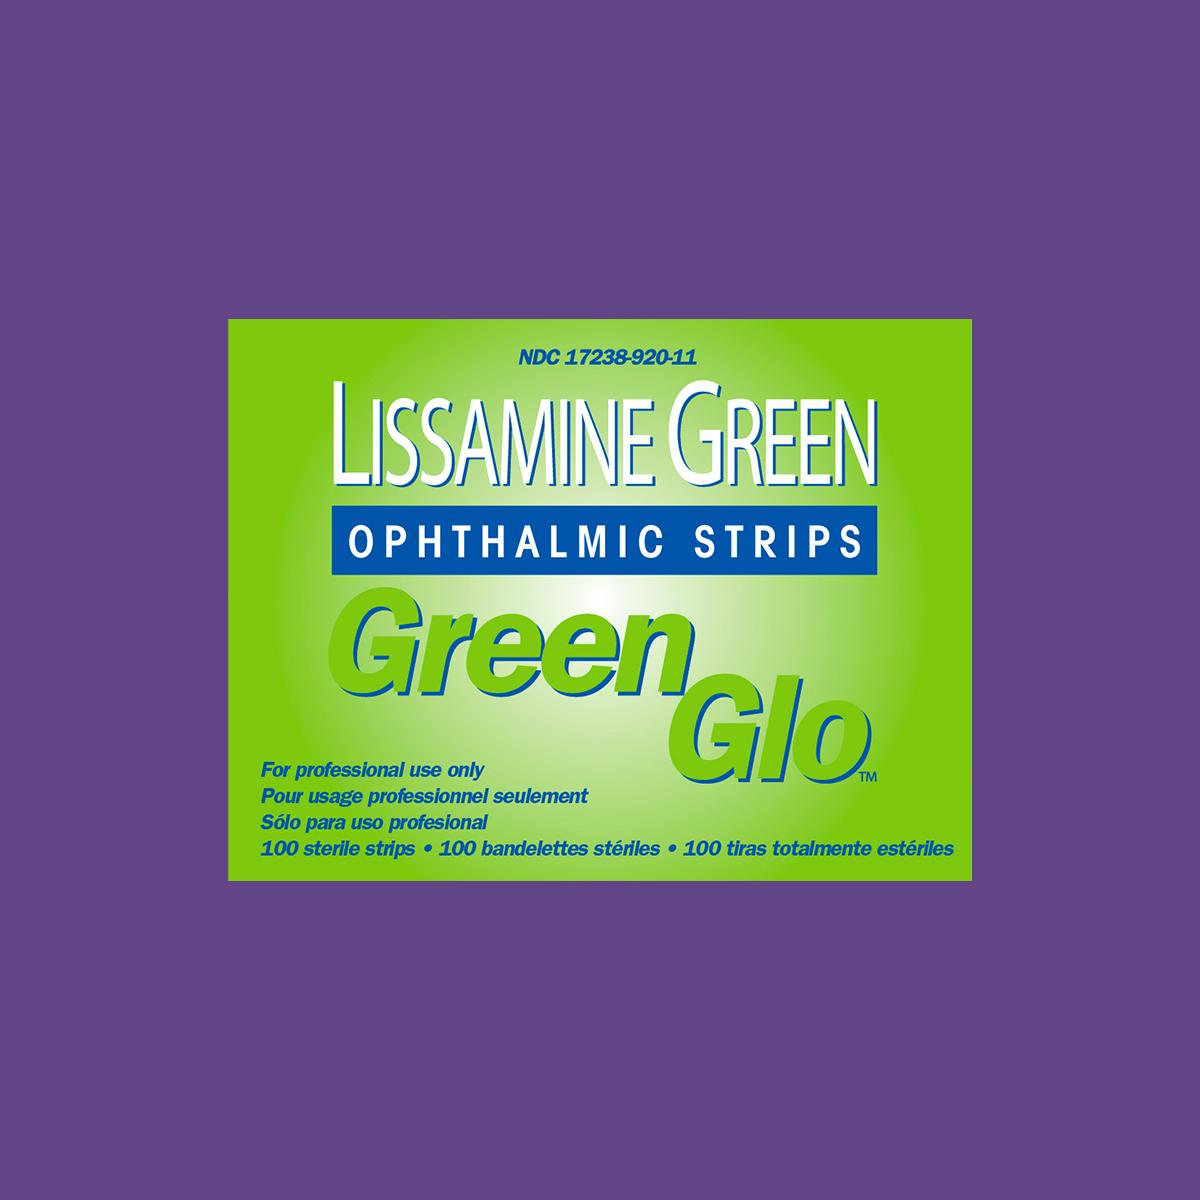 Green Glo Lissamine Green Ophthalmic Strips